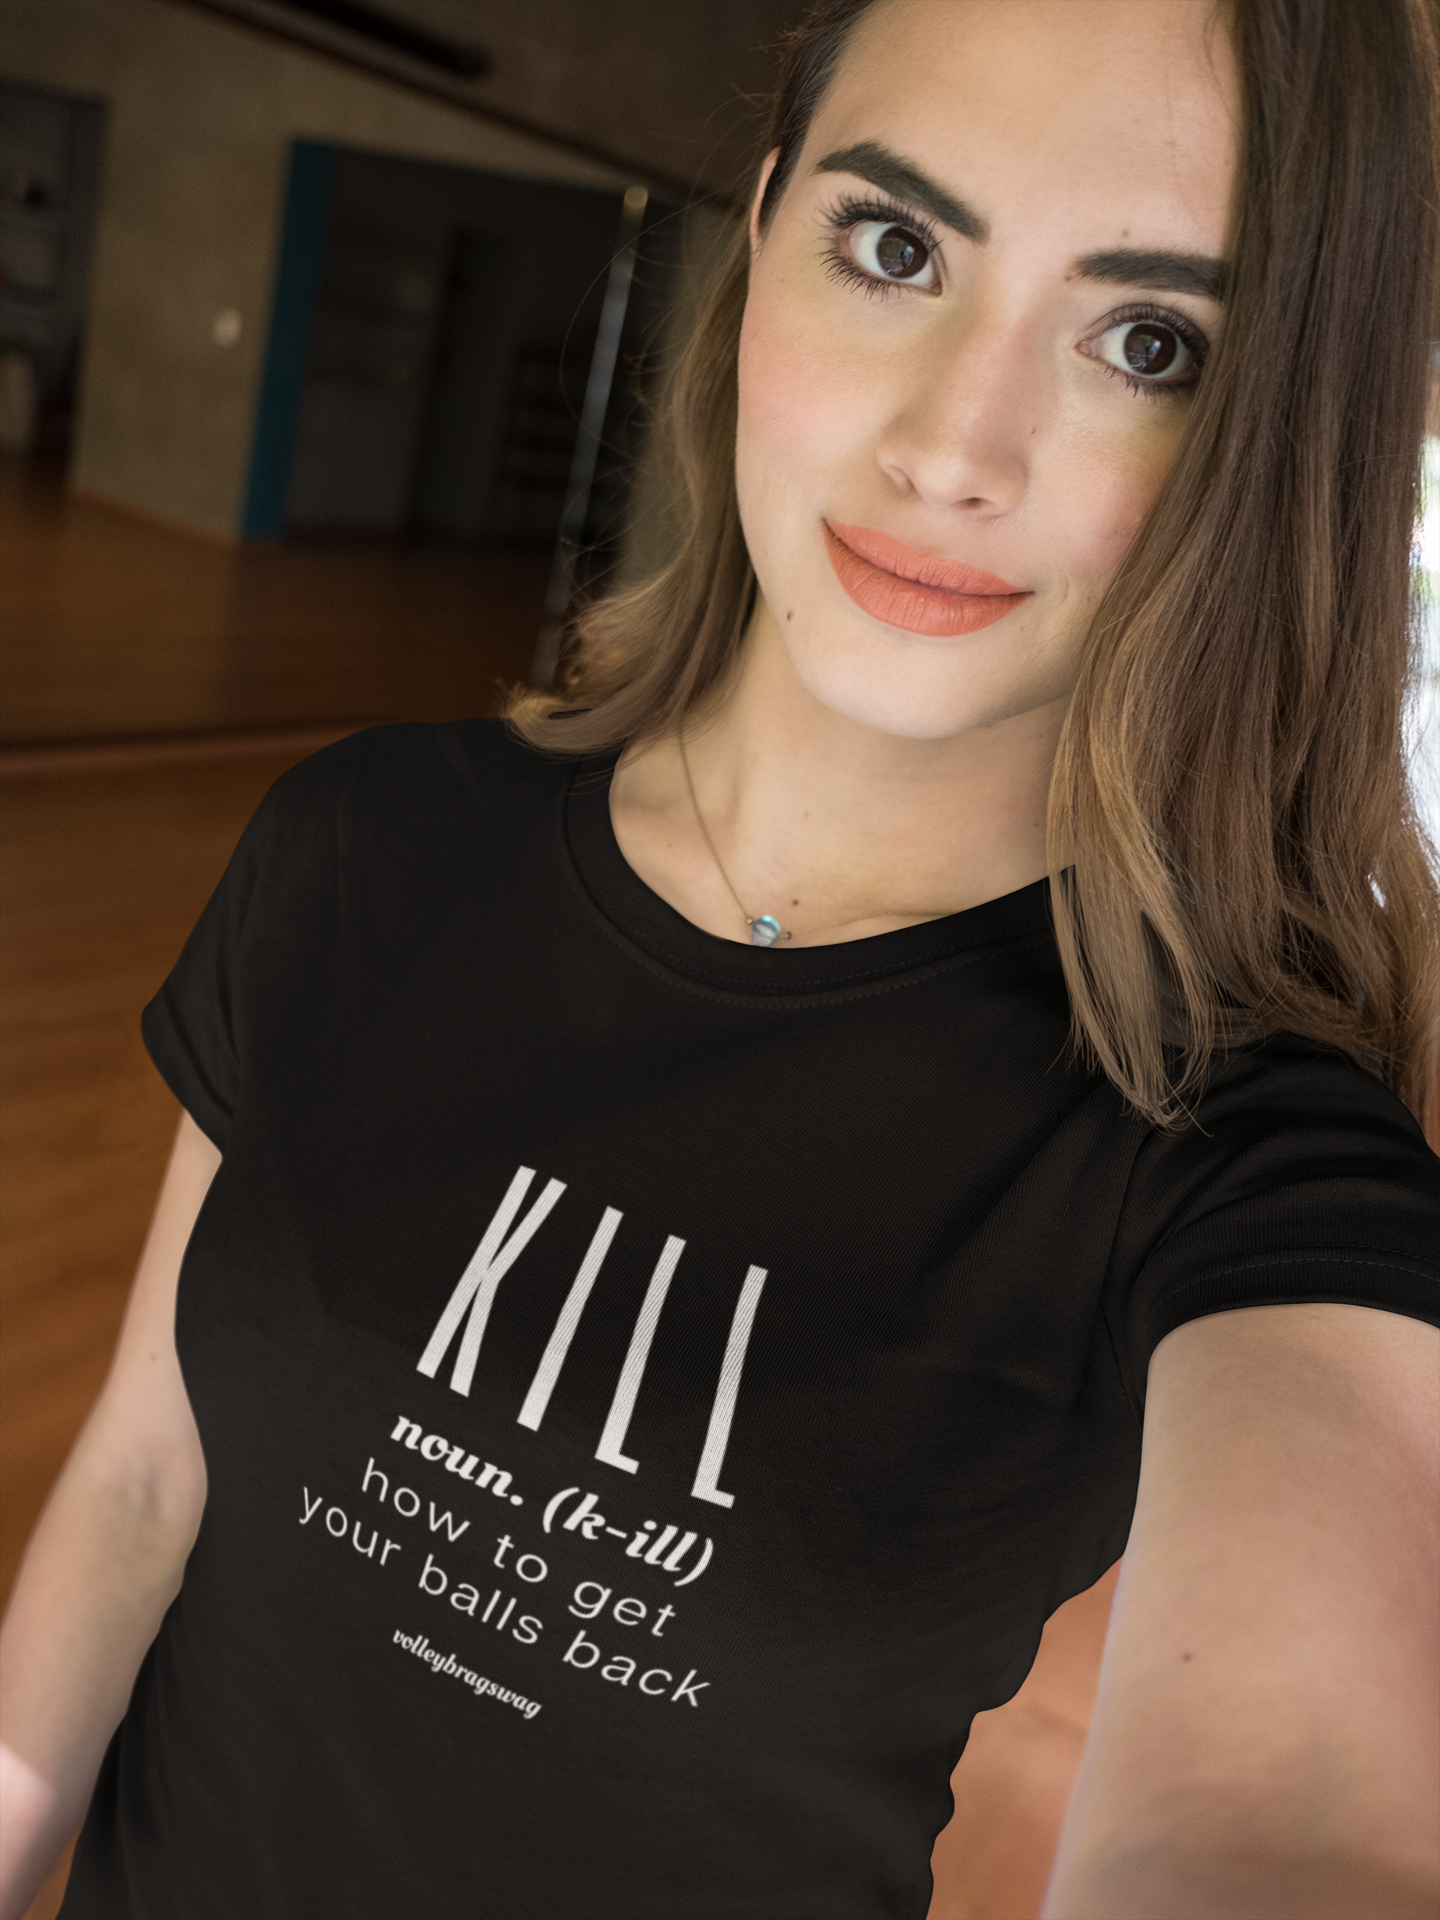 KILL (noun) How To Get Your Balls Back volleyball shirt. April Chapple, Launches a Hilarious Volleyball T-shirt Line With Fun Tongue-in-Cheek Designs sure to make players and enthusiasts laugh.